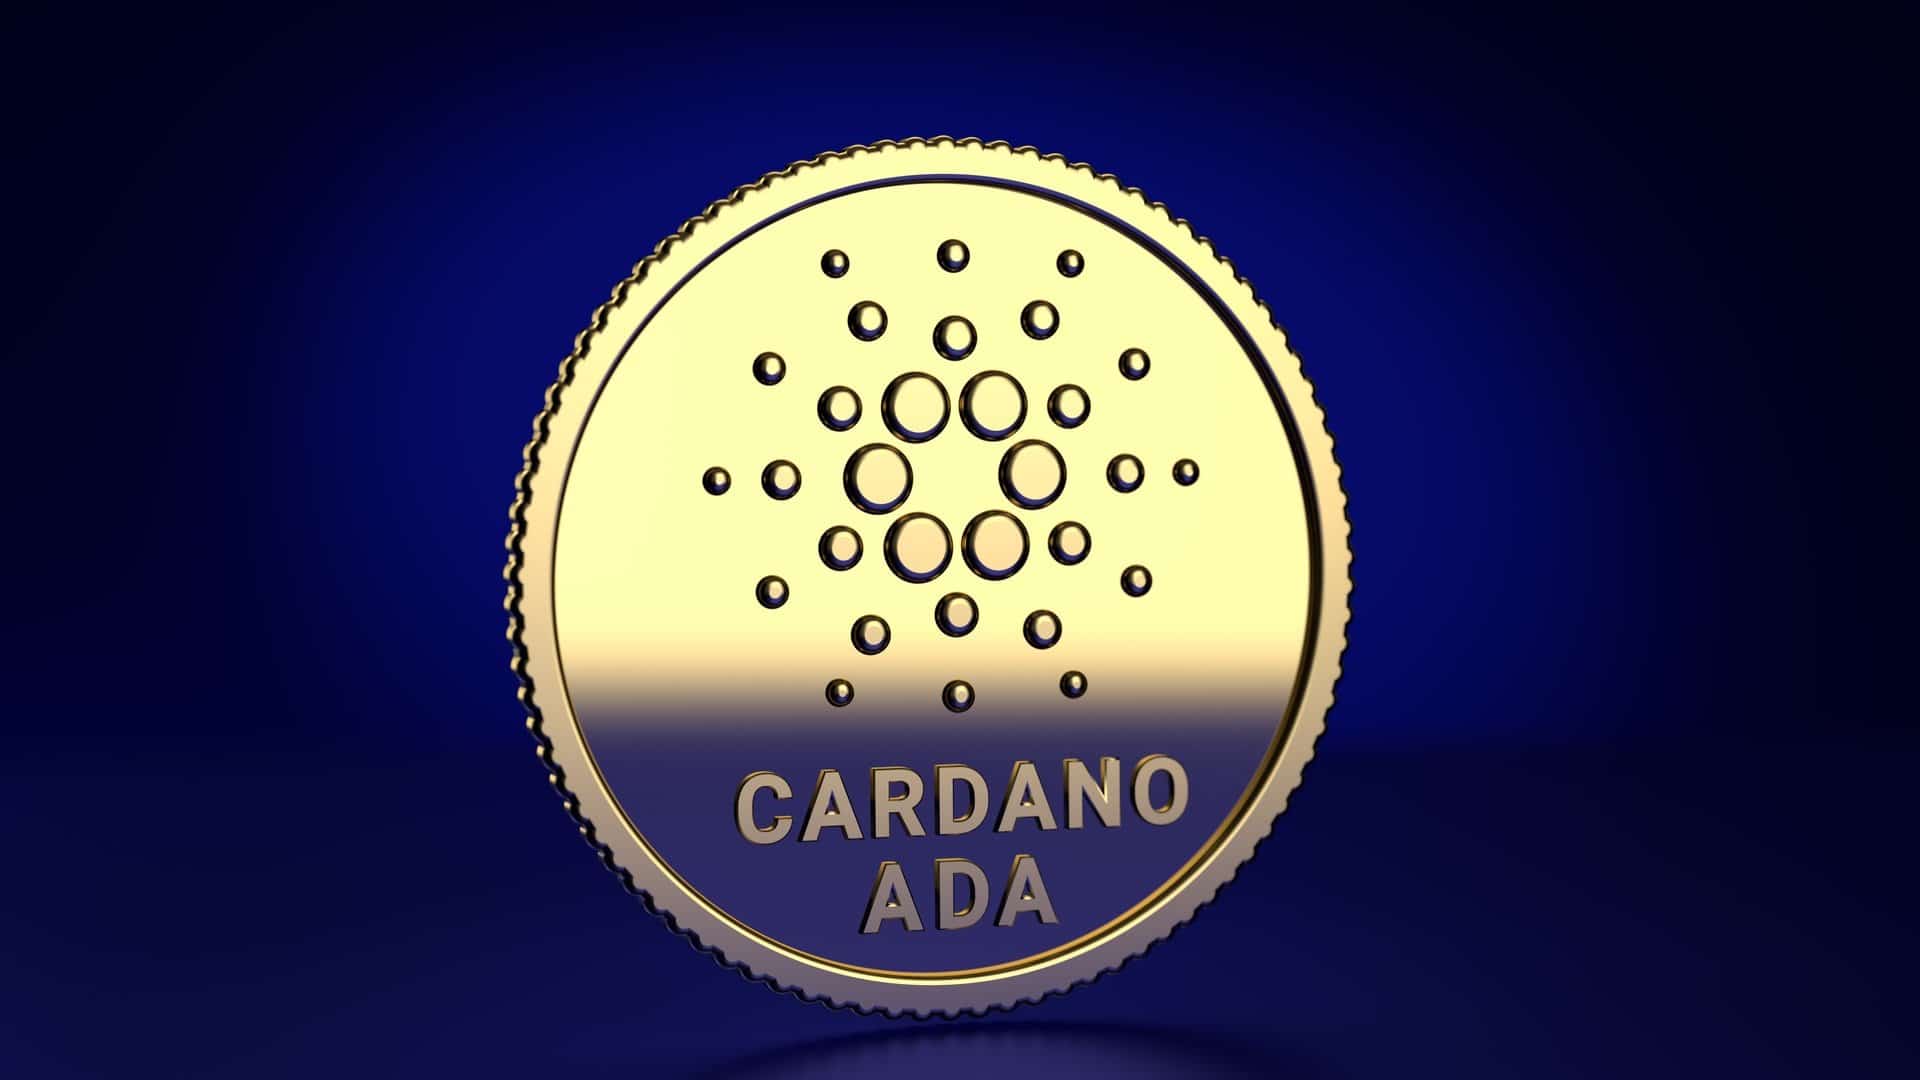 My Latest Cardano (ADA) Price Prediction Was Spot-On. What Next?